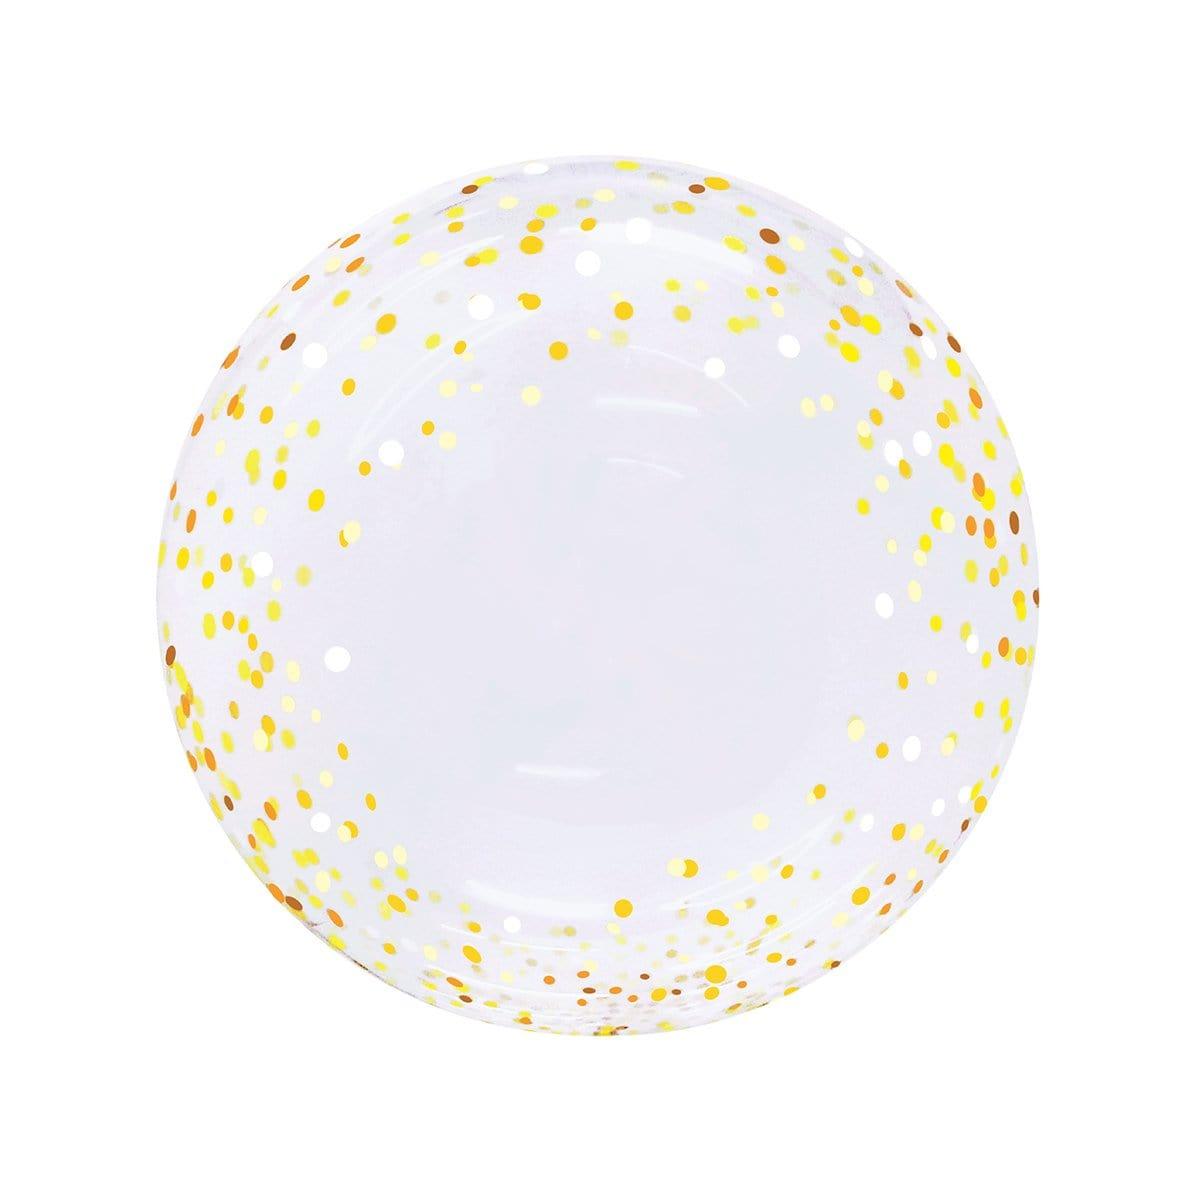 Buy Balloons HD Bubble Balloon, Gold Confetti, 20 Inches sold at Party Expert